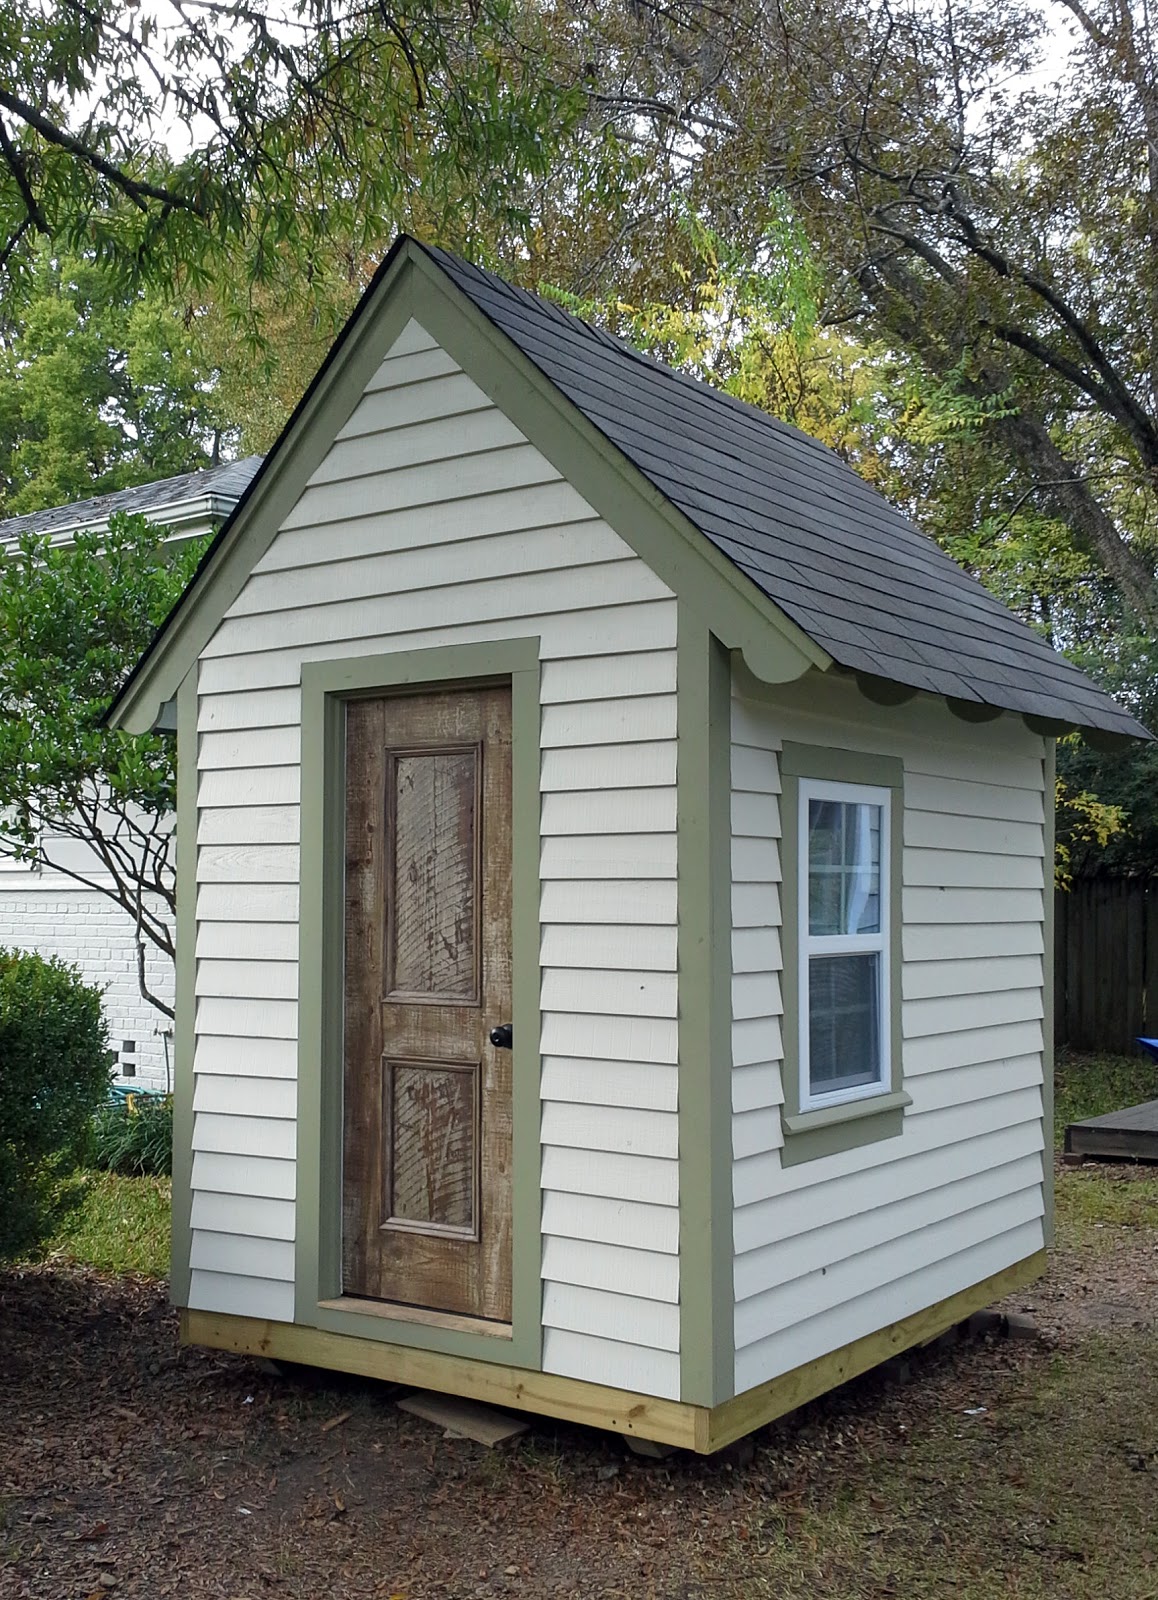 APlaceImagined: Free Playhouse Plans!